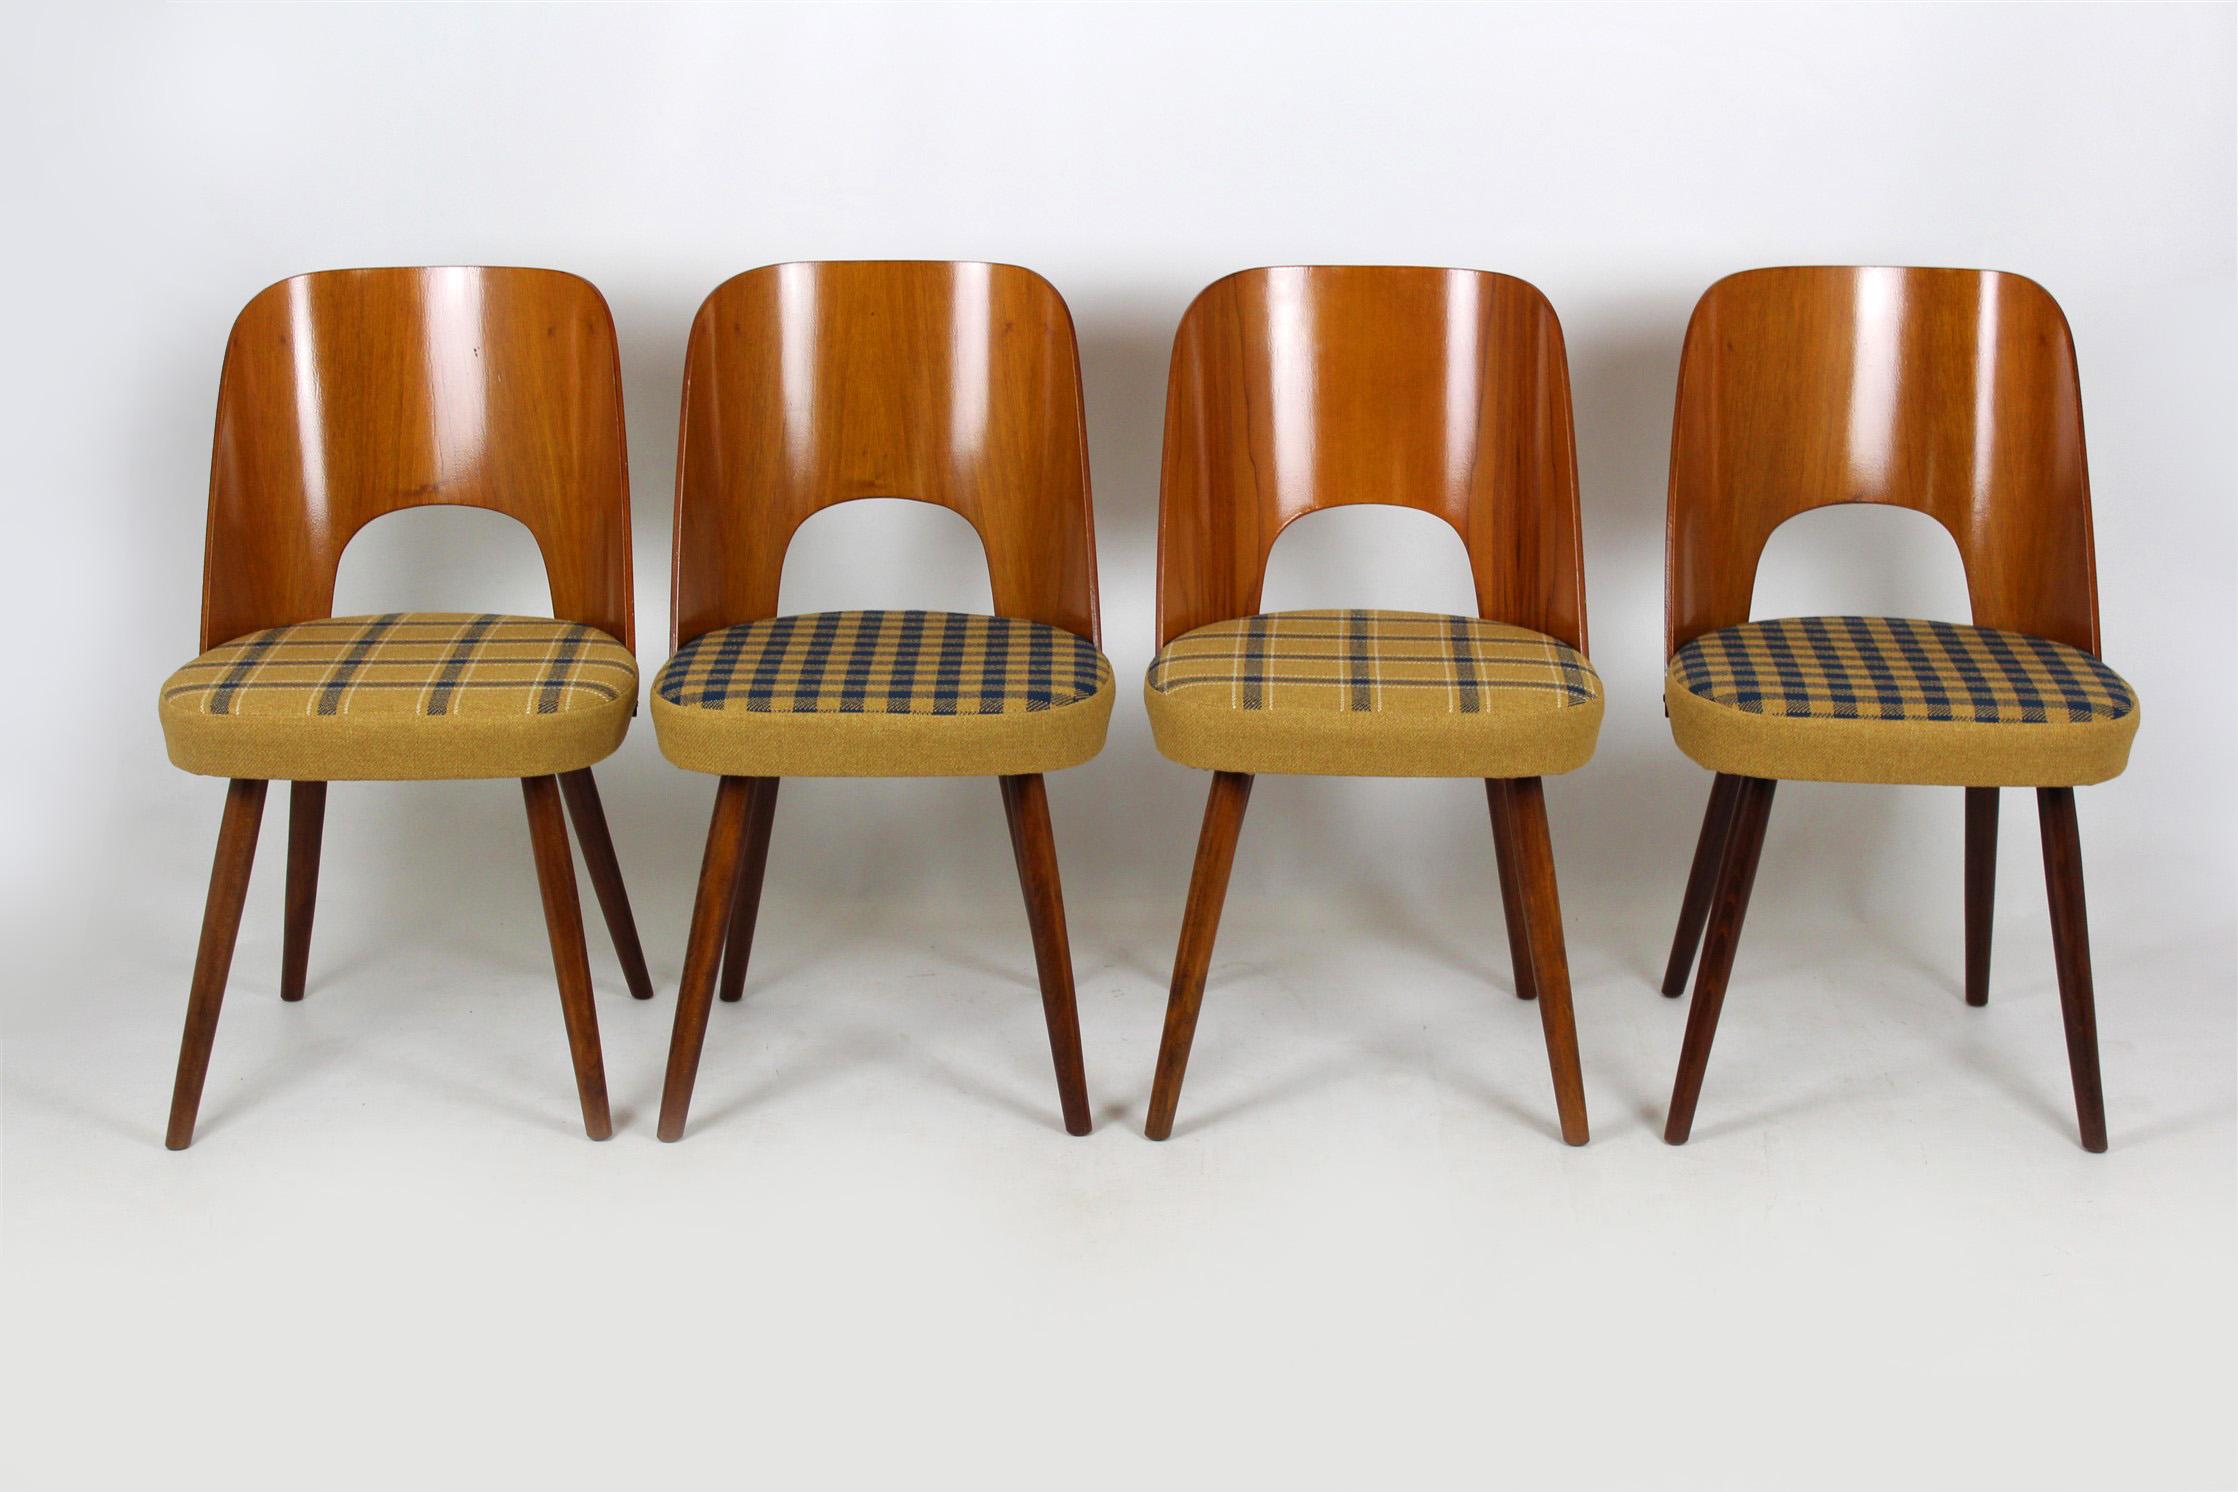 Set of four chairs from Tatra. Designed by Oswald Haerdtl and produced in 1960s in former Czechoslovakia. Backrests made of veneered bent plywood. Seats reupholstered in checkered fabric.